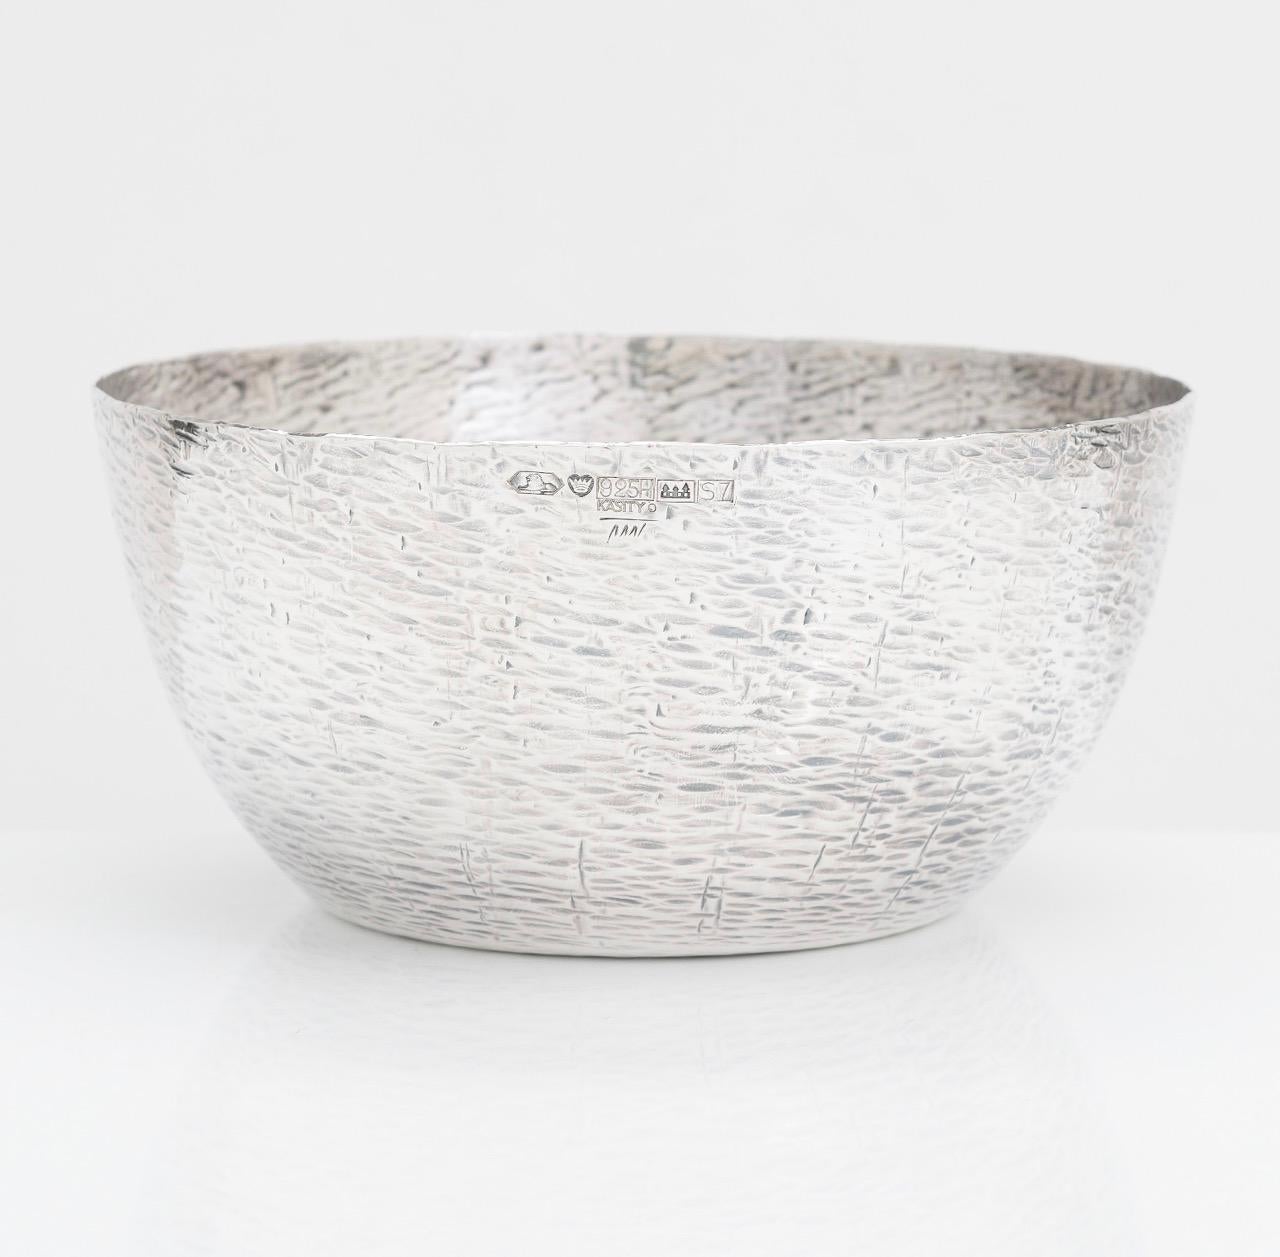 20th Century Hammered Silver Bowl by Tapio Wirkkala, TW 243, Finland, 1971, Decorative Bowl For Sale